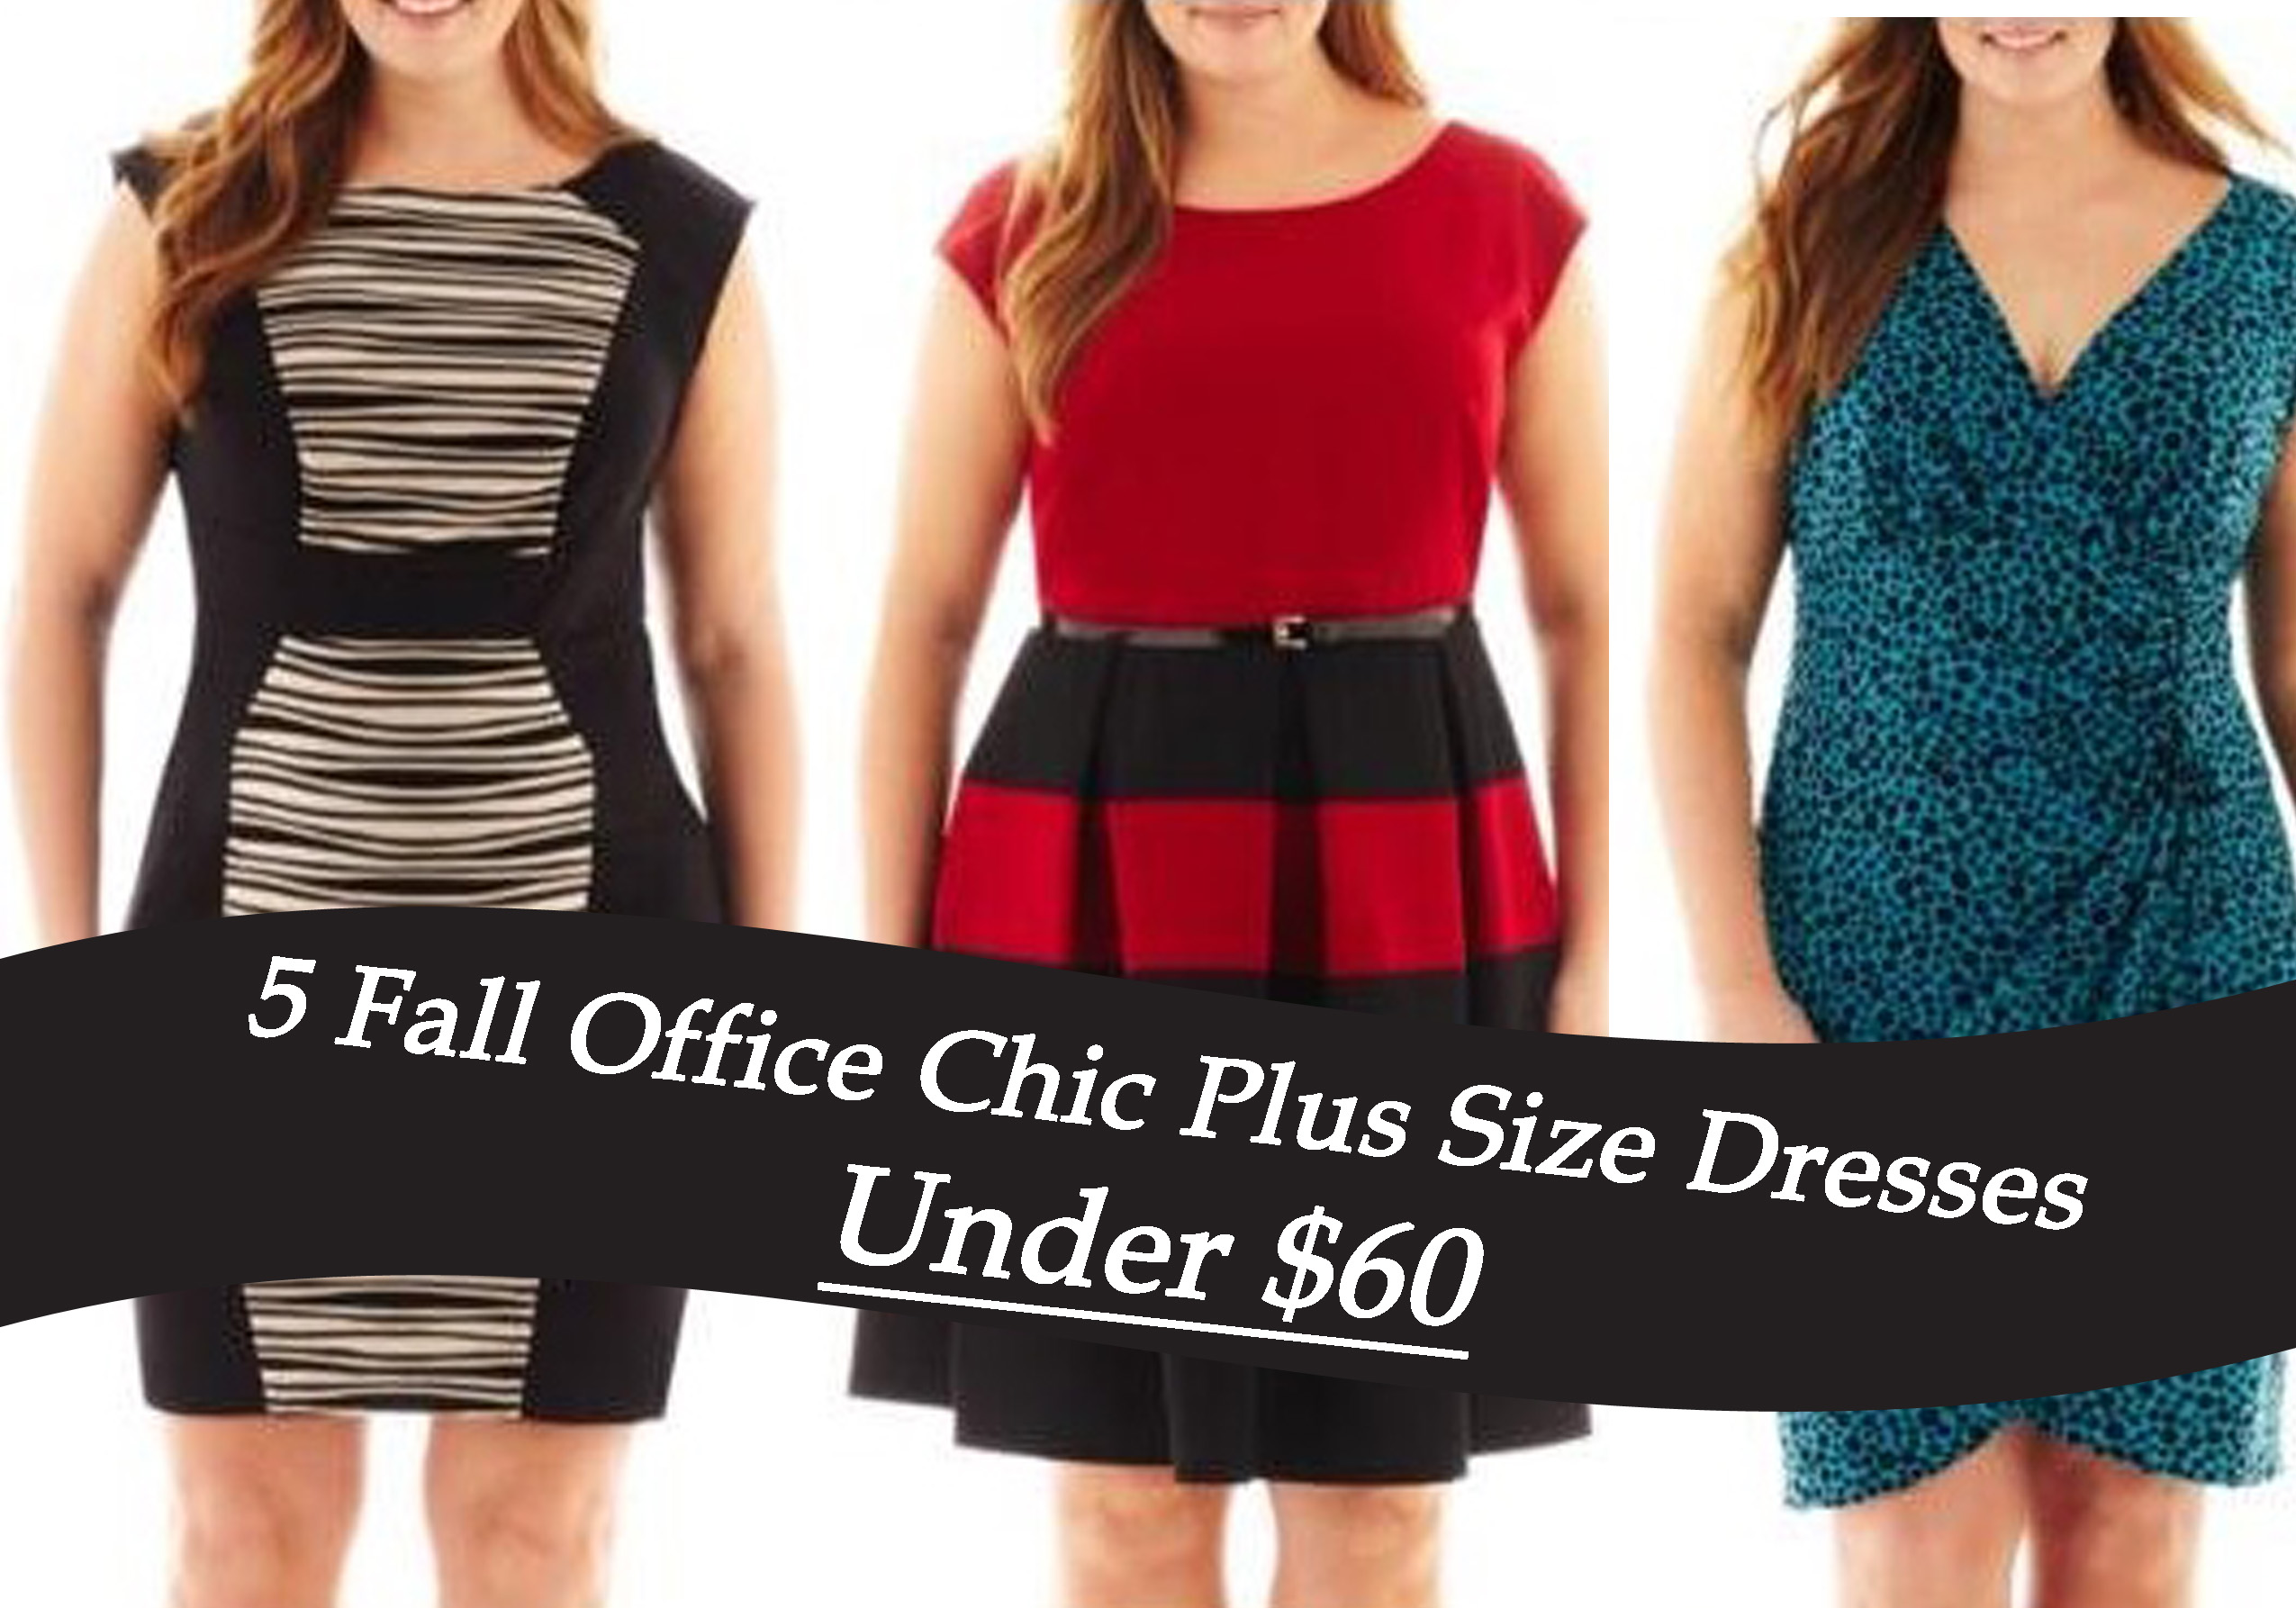 jcpenney business dresses